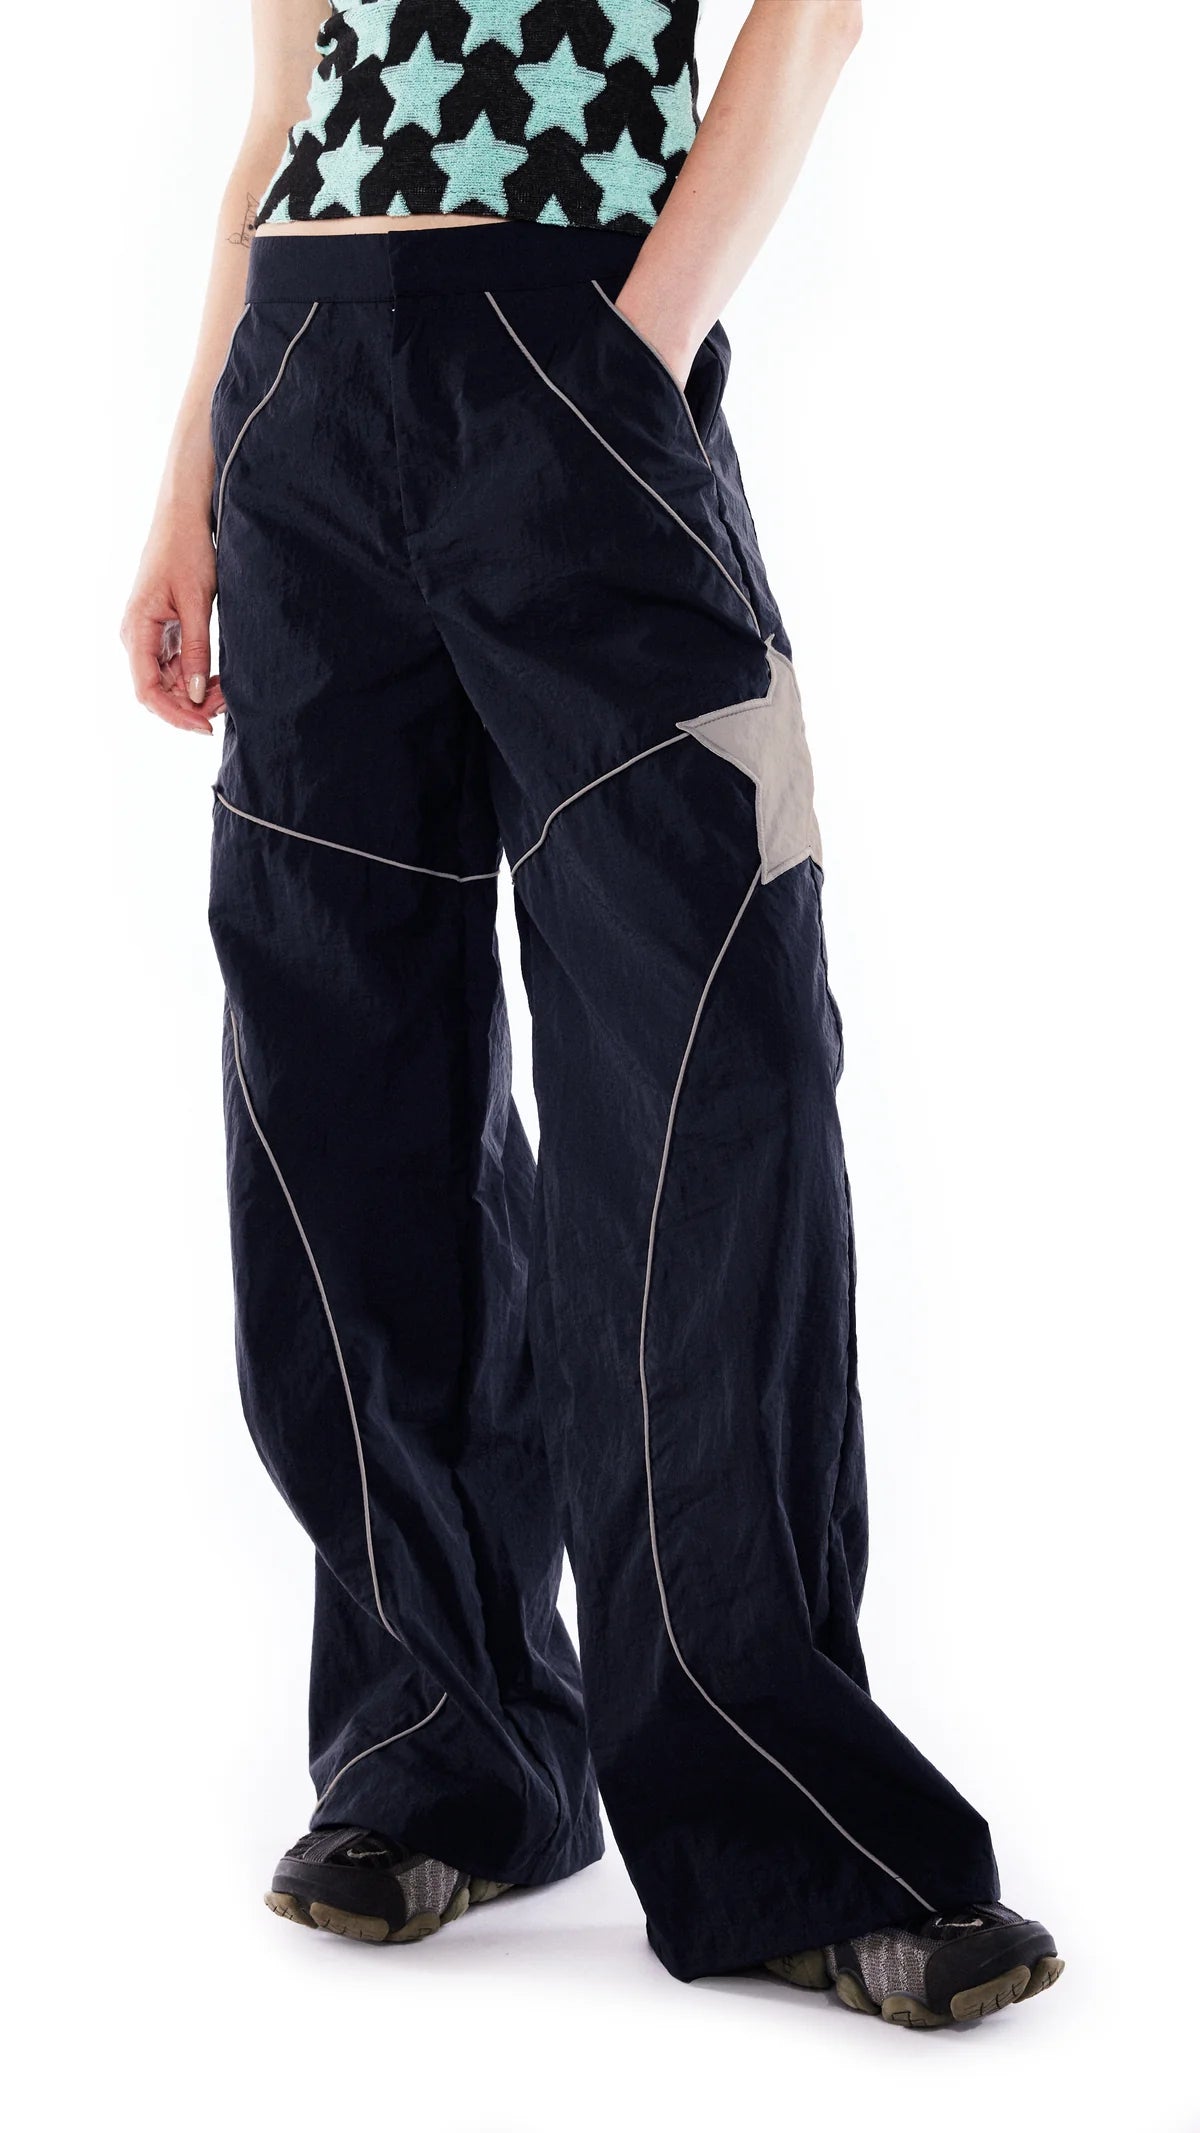 Buy Basic Pleasure Mode Star Puddle Cargo Pants Online - Price Match Promise